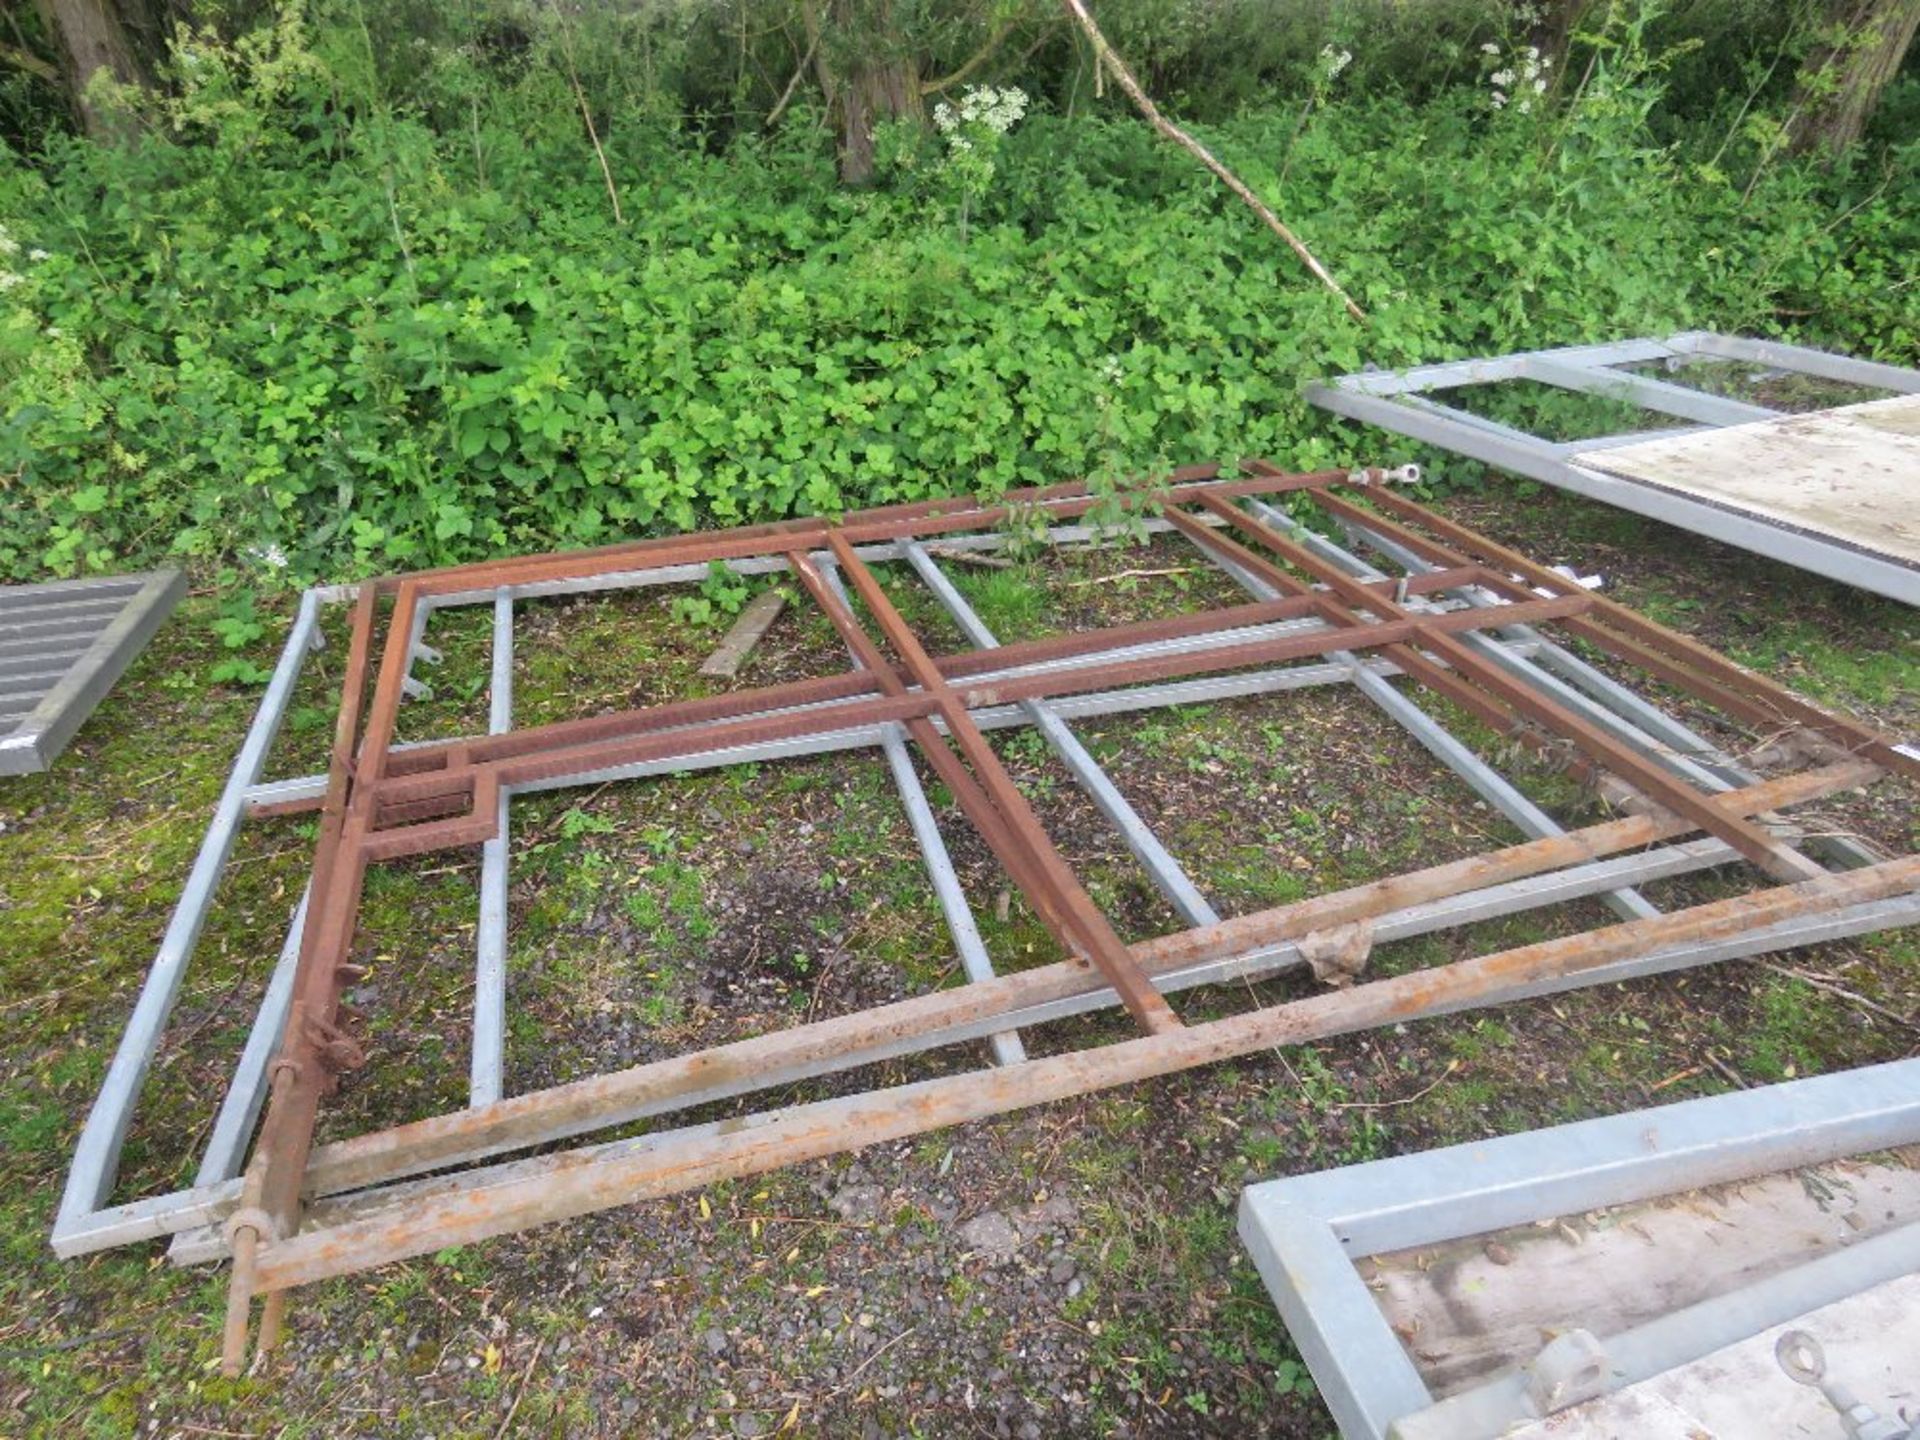 2 X PAIRS OF METAL GATE FRAMES, 2.35M HEIGHT X 3M WIDE EACH (6M SPAN APPROX EACH PAIR). - Image 2 of 2